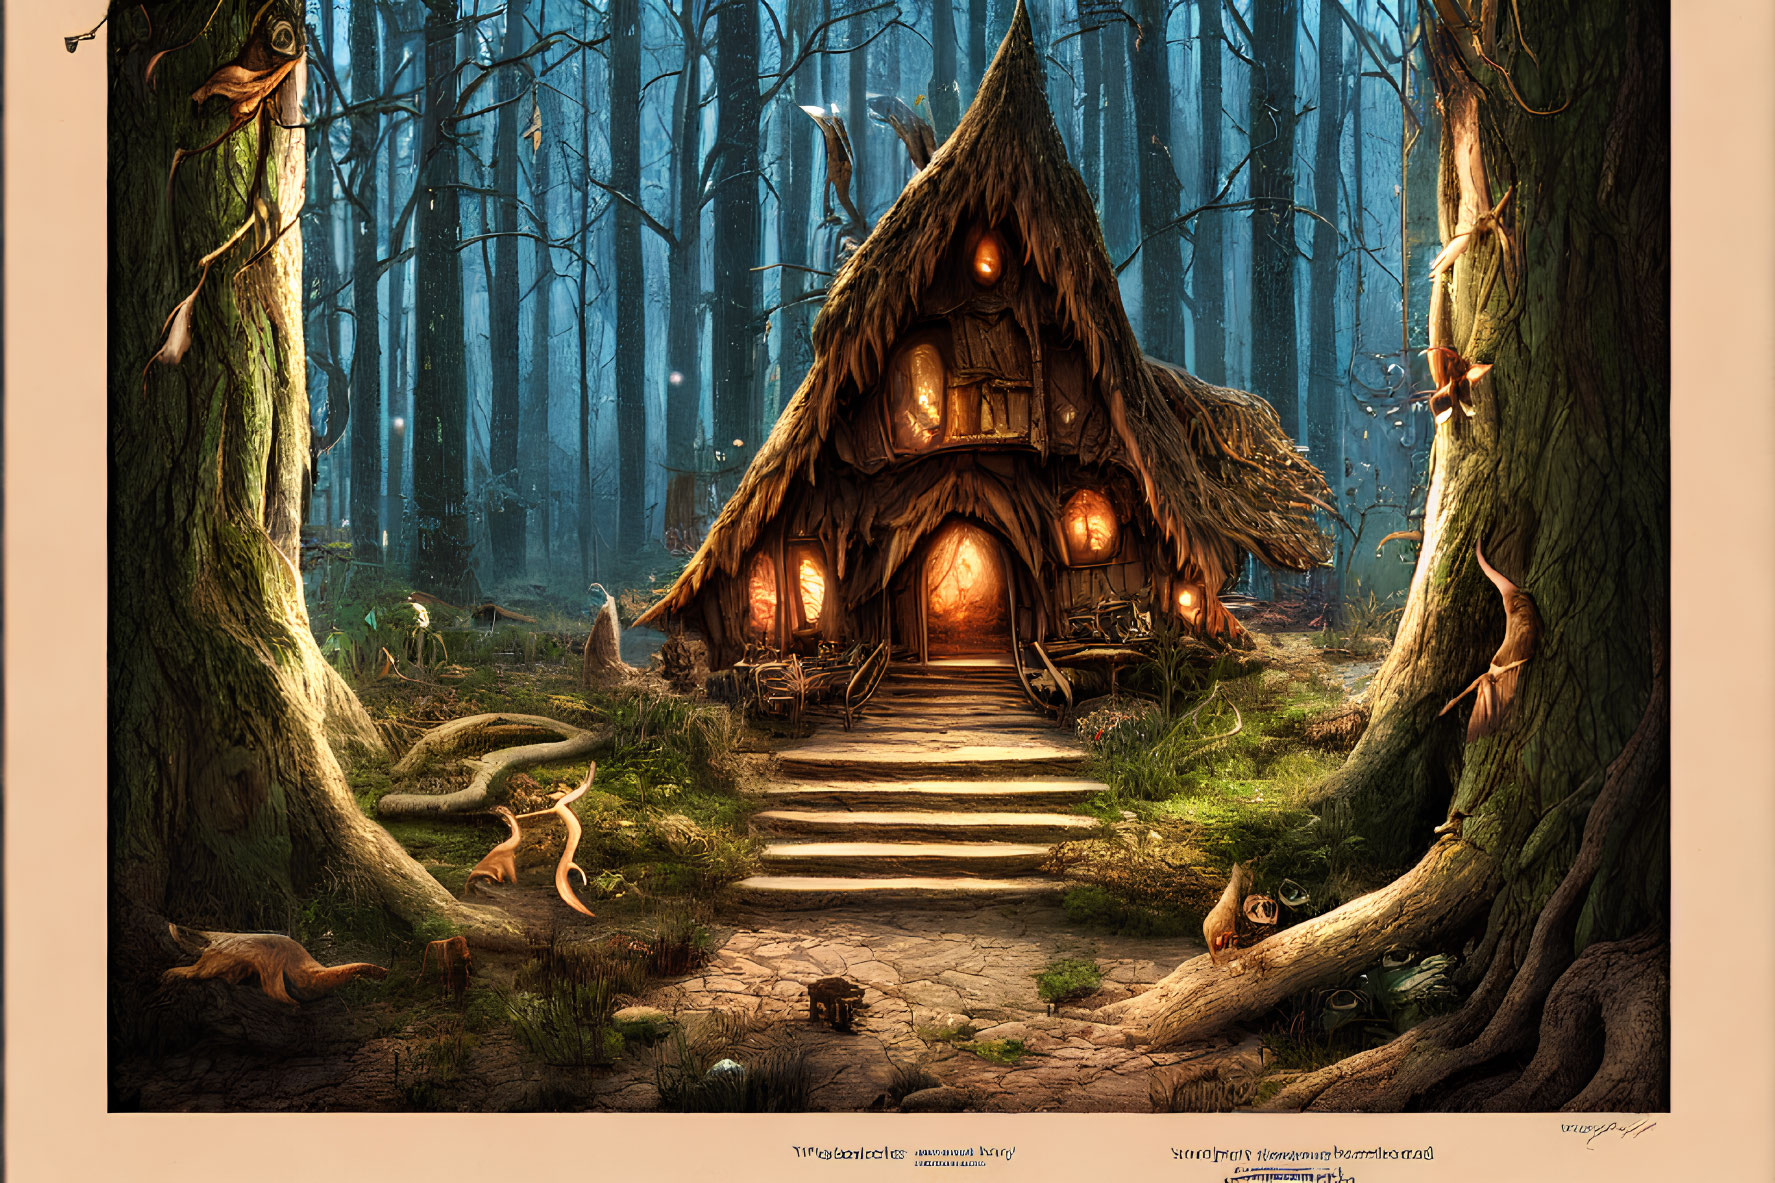 Enchanting forest scene with whimsical cottage and forest creatures at twilight